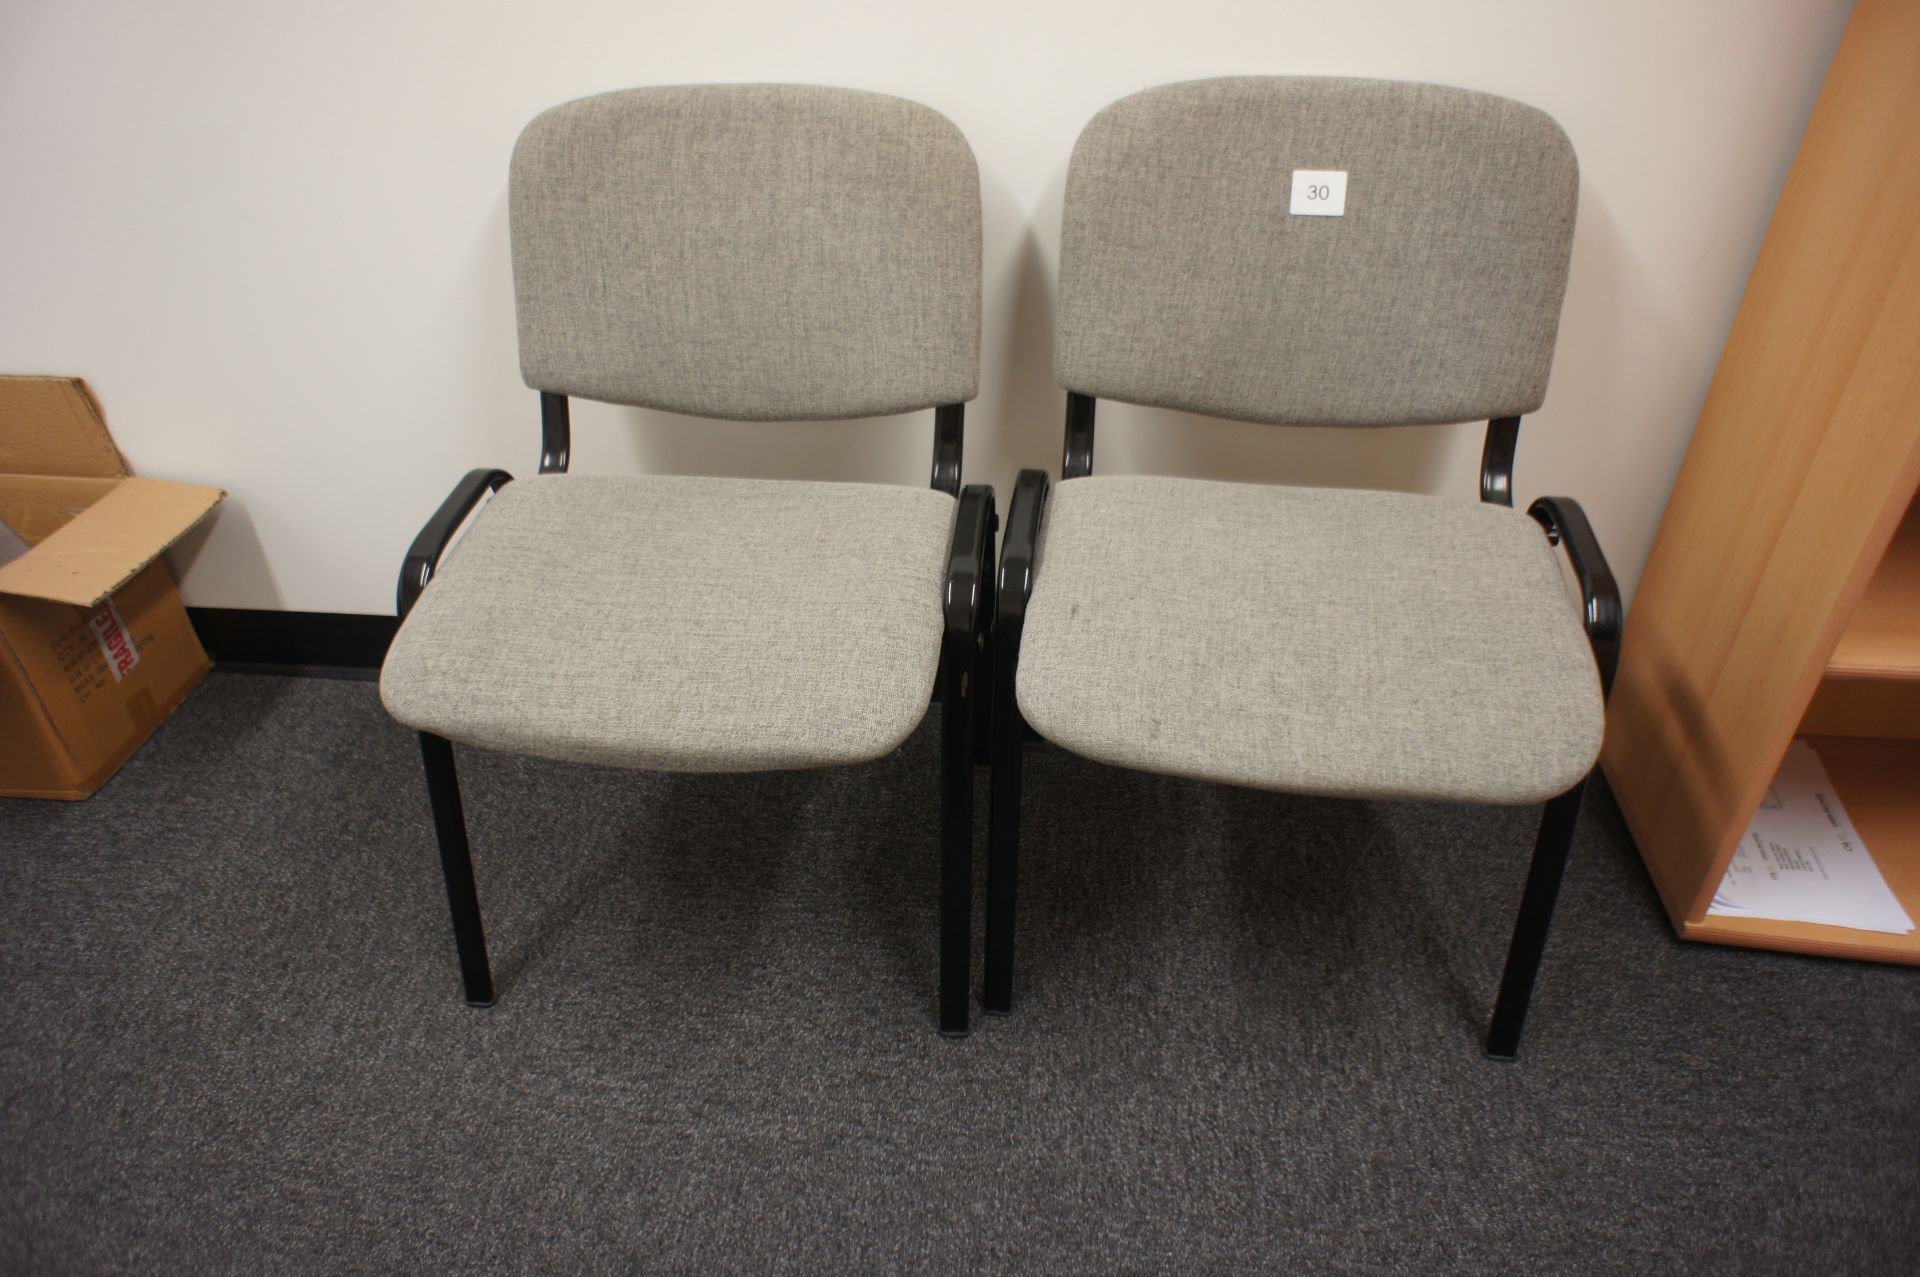 4 Upholstered Reception/Meeting Chairs